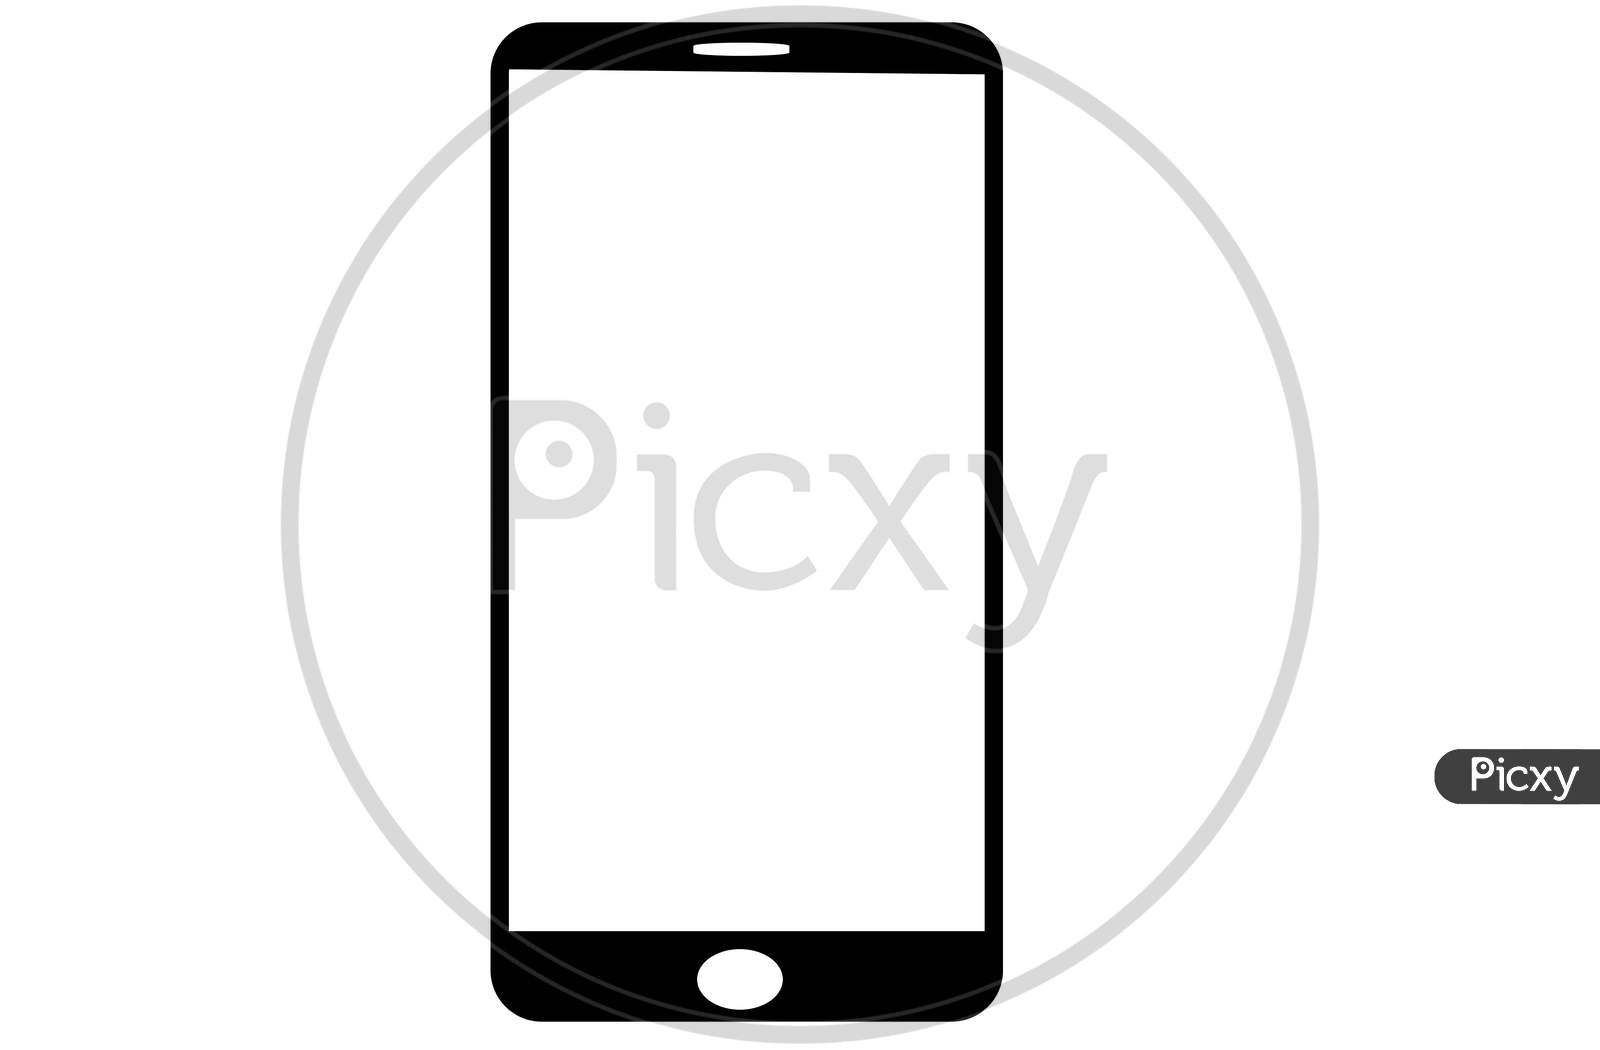 Mobile Phone Design With White Background. Black Color Frame With White Button.